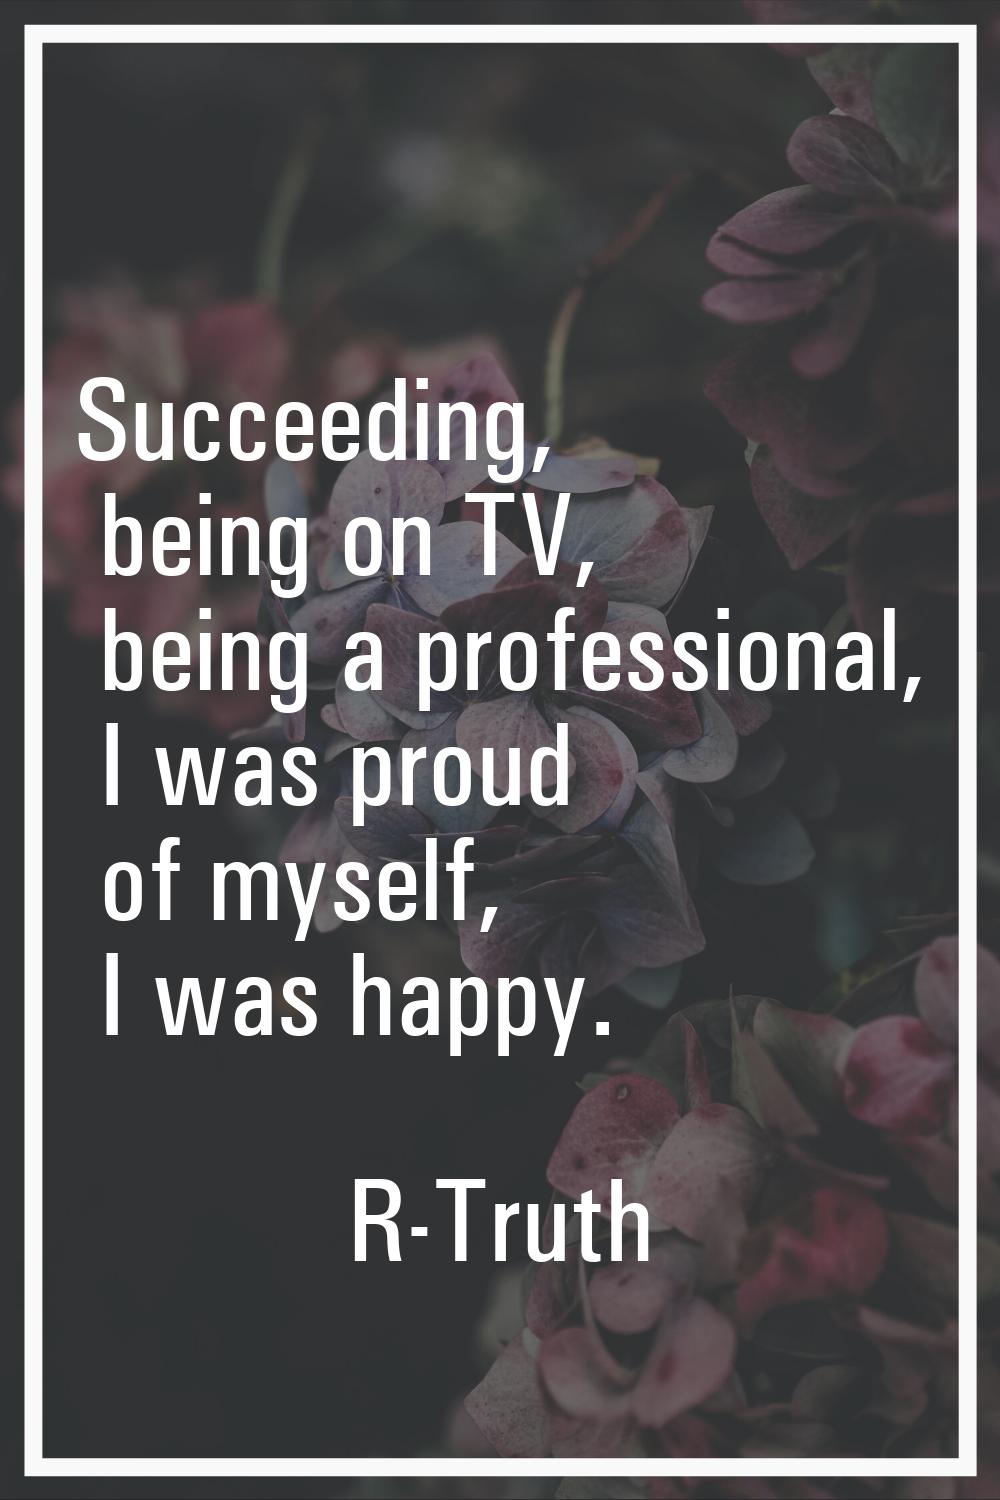 Succeeding, being on TV, being a professional, I was proud of myself, I was happy.